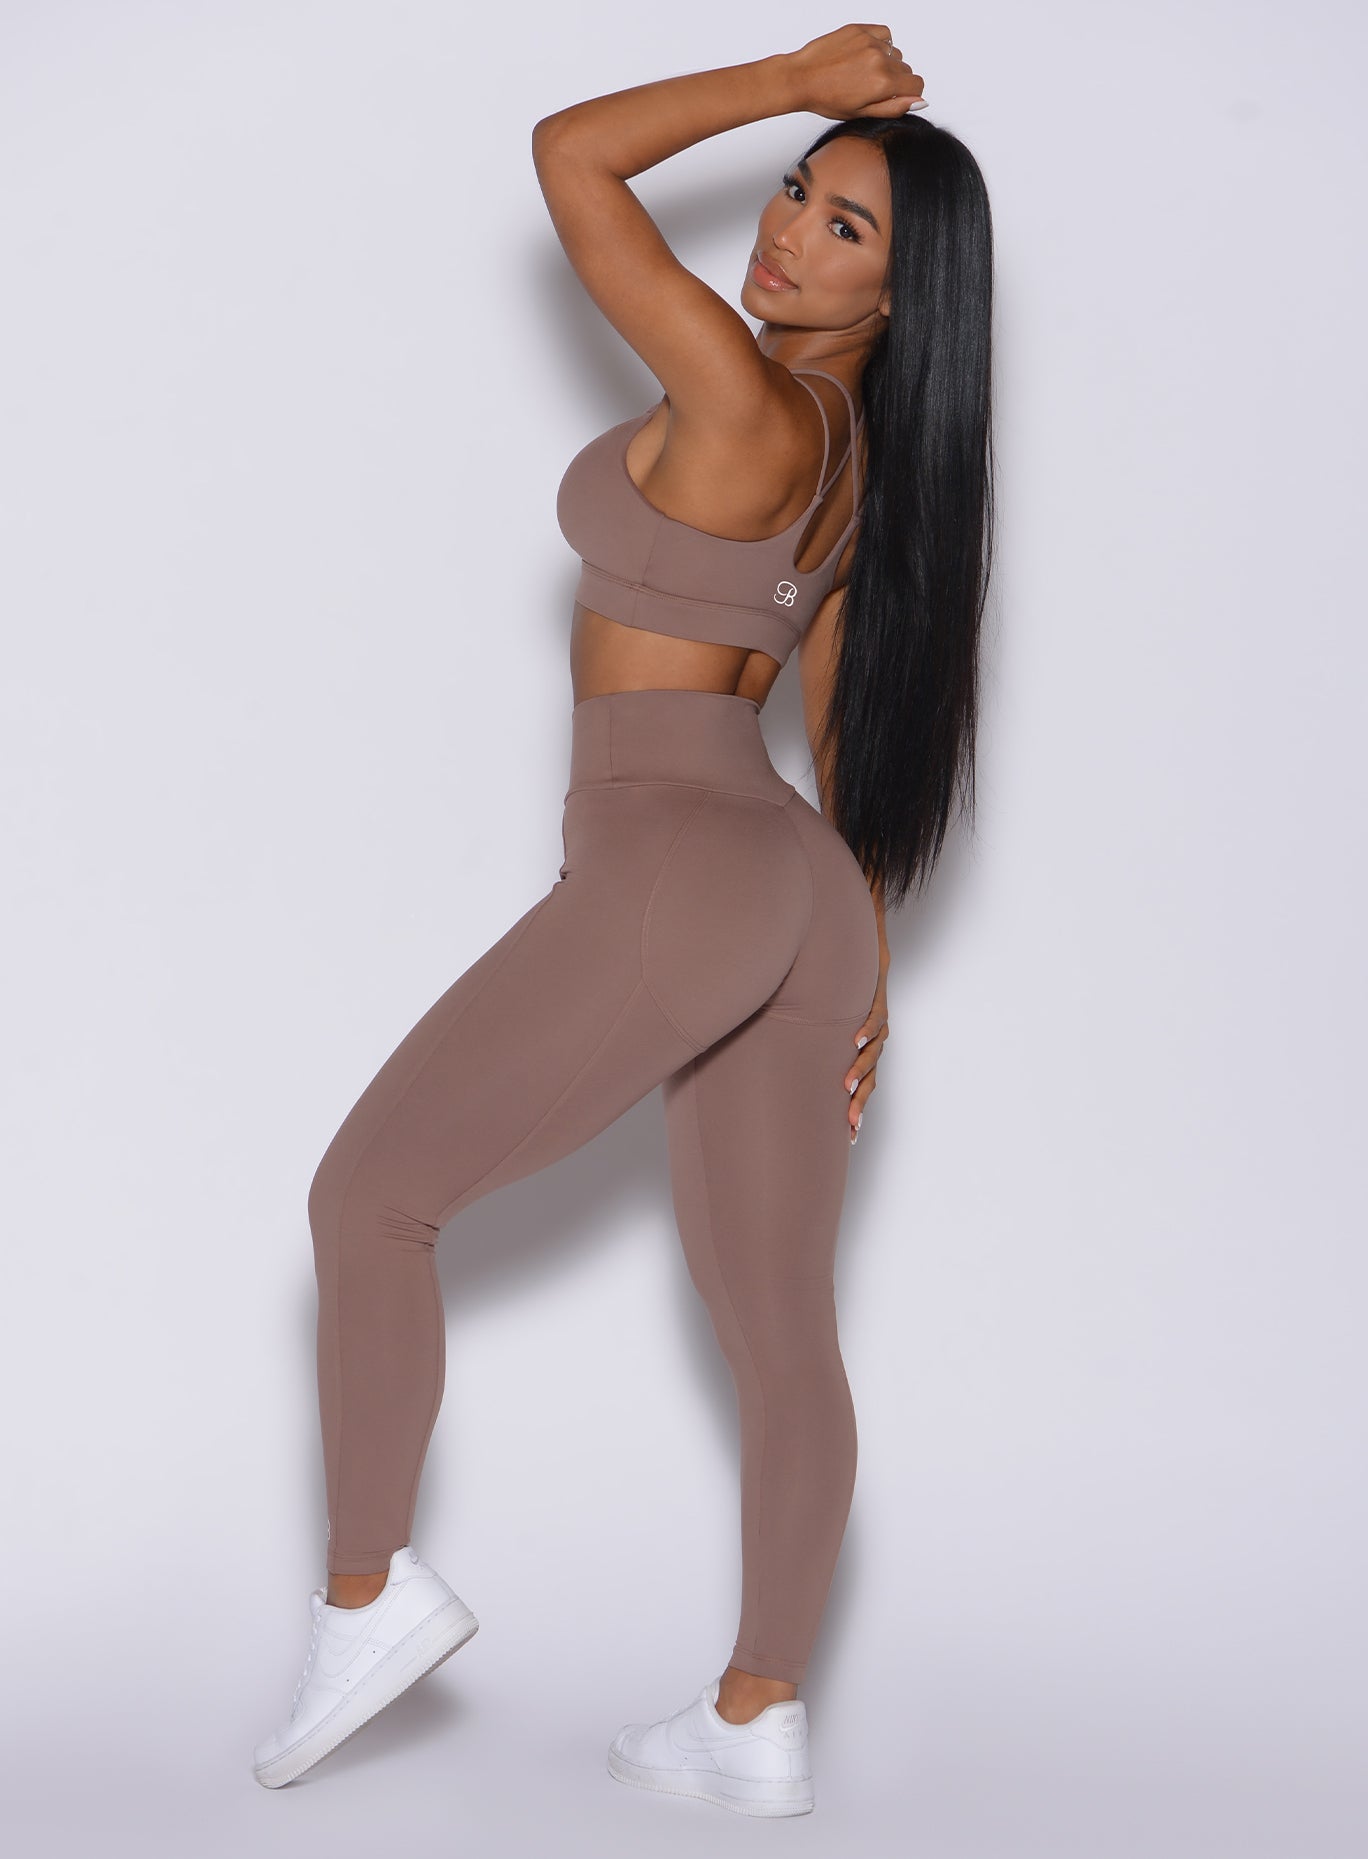 Left side profile view of a model facing to her left wearing our new and enhanced shape leggings in tan color and a matching sports bra